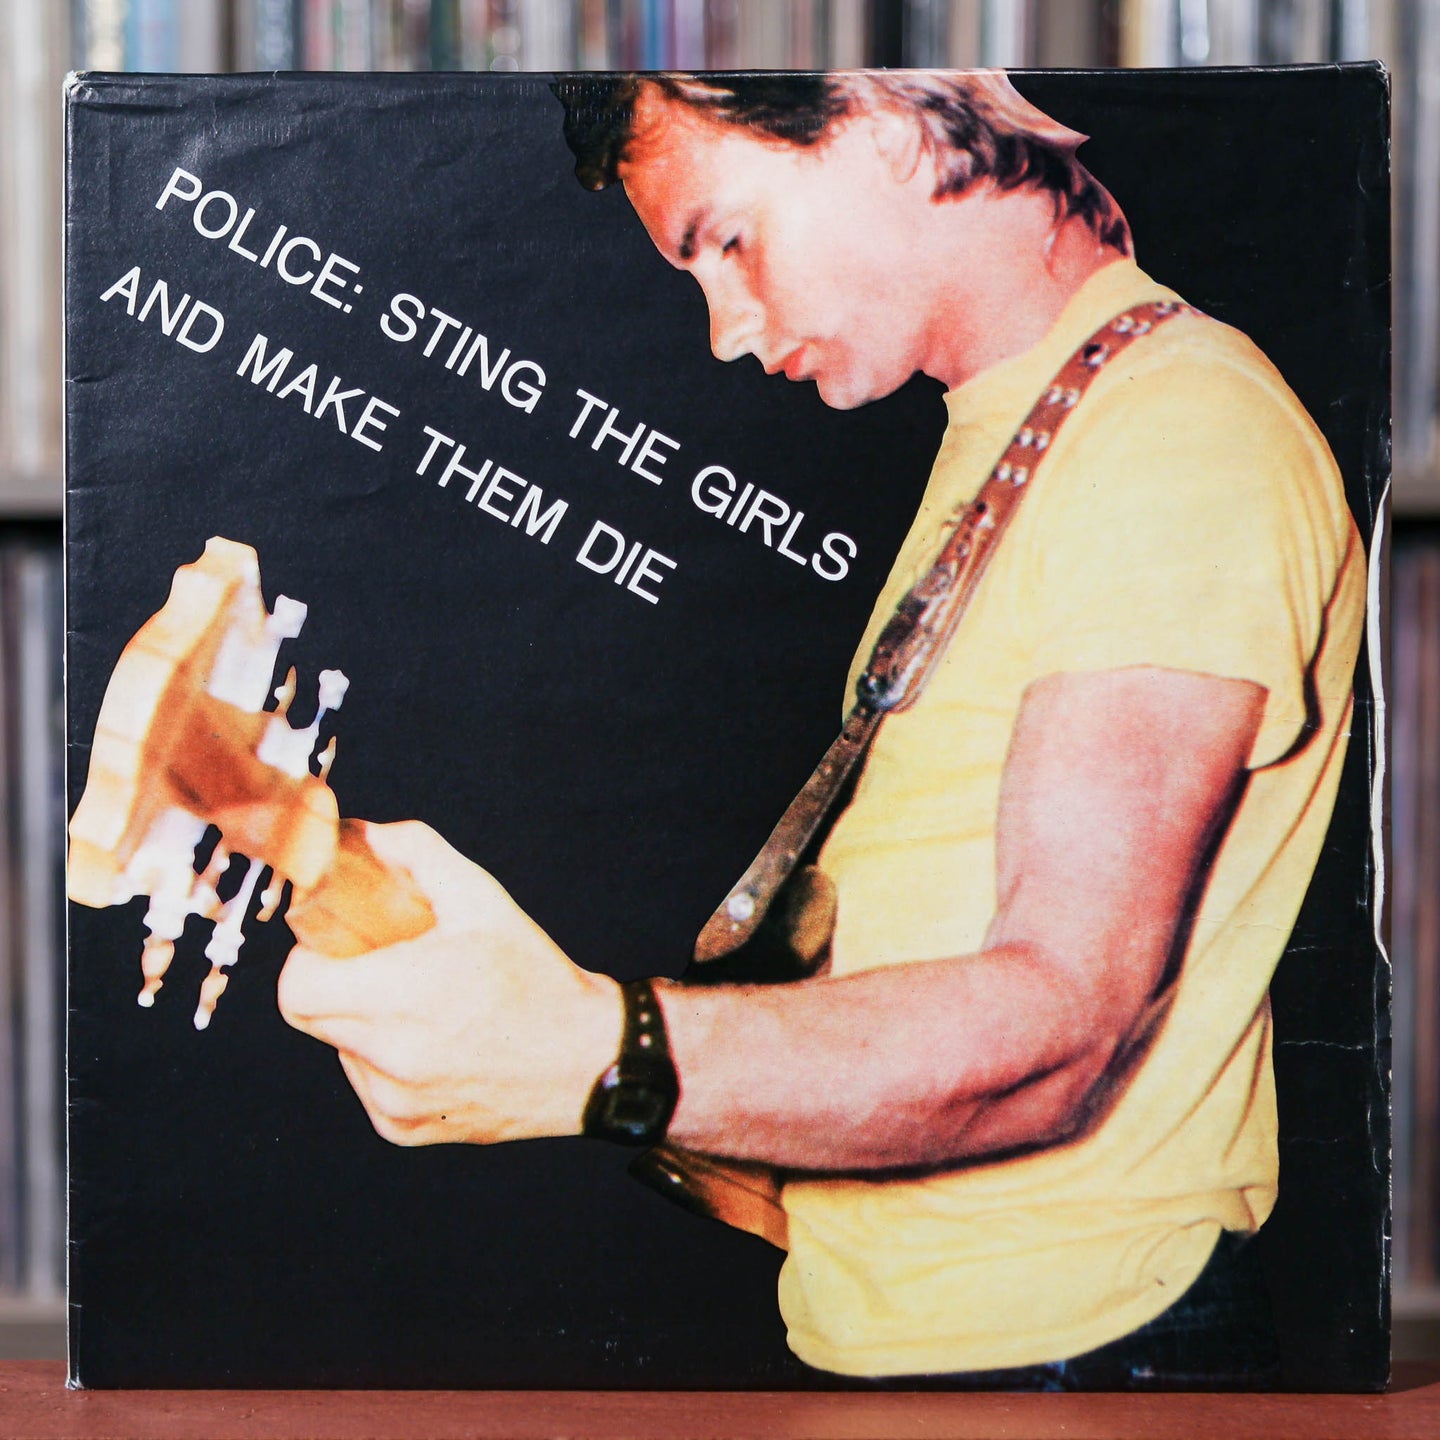 The Police - Sting The Girls And Make Them Die - Rare Japan Private Press - 1980 Rising Dun Records, VG+/VG+